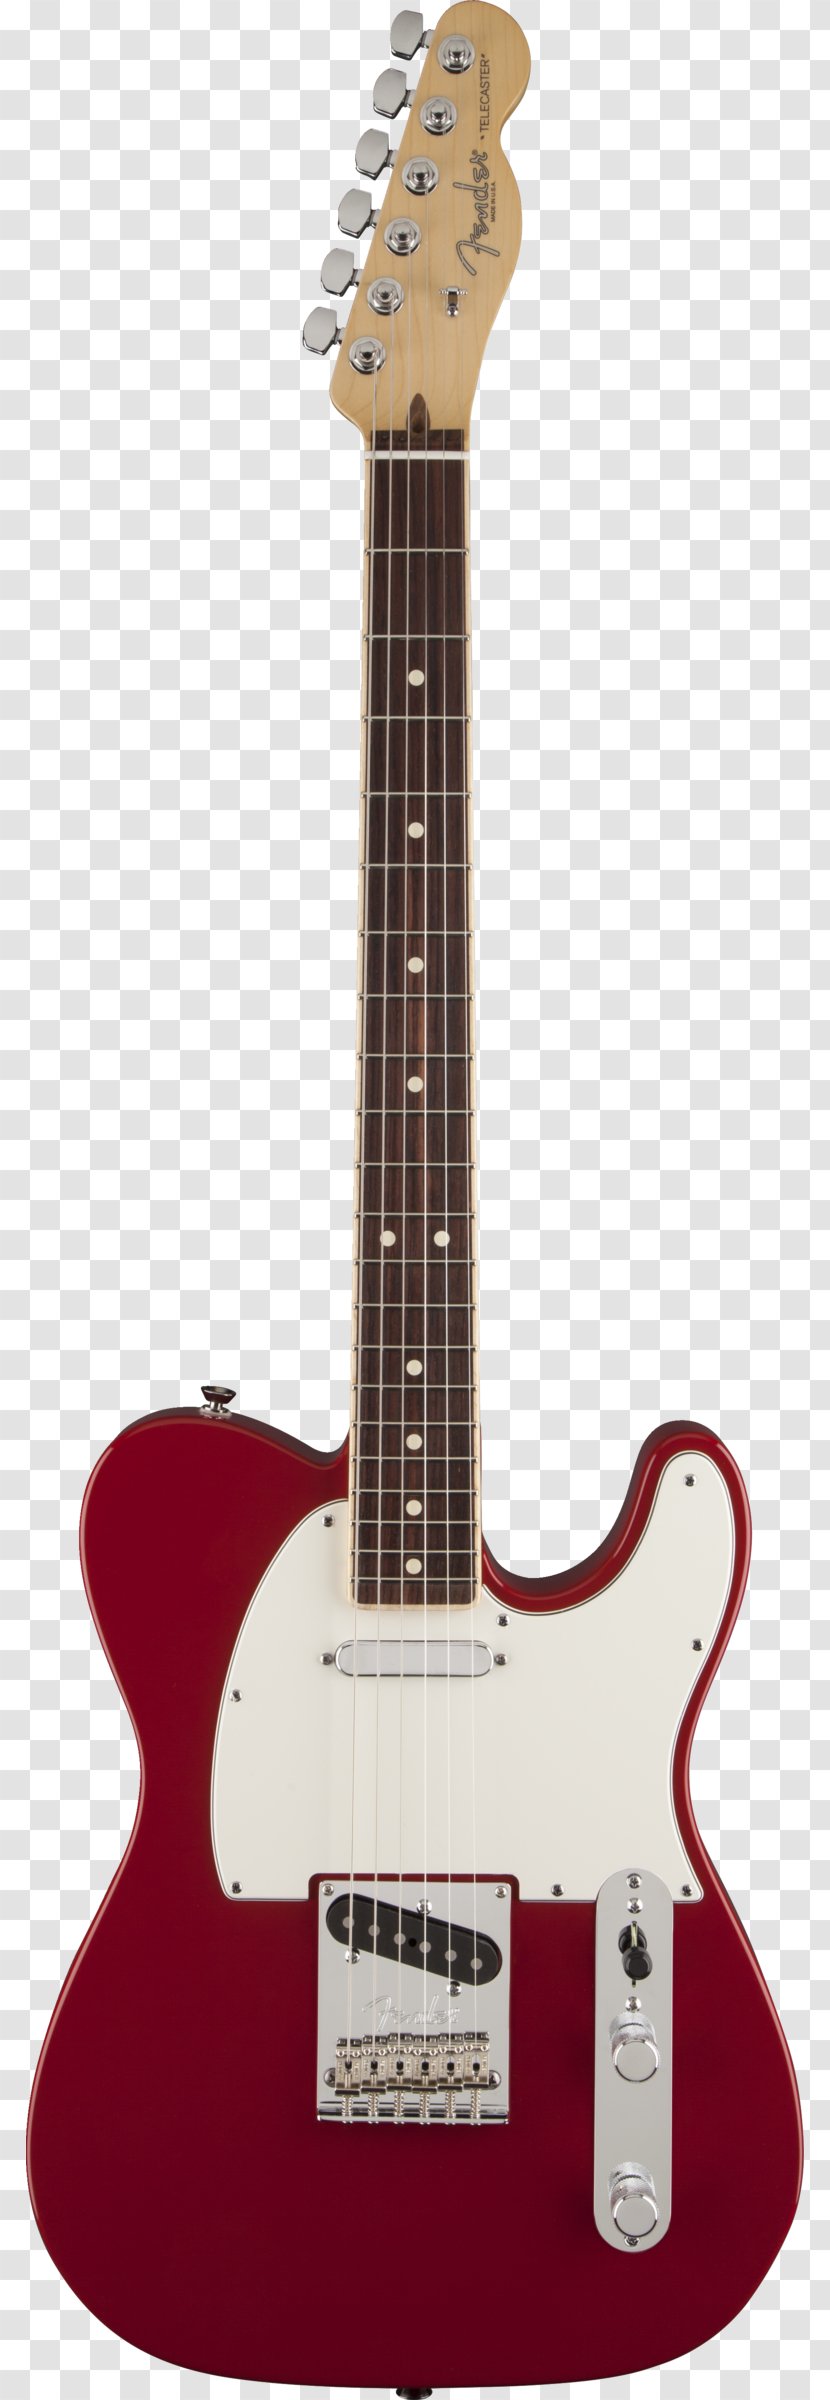 Fender Telecaster Musical Instruments Corporation Electric Guitar Stratocaster Squier - Acoustic Transparent PNG